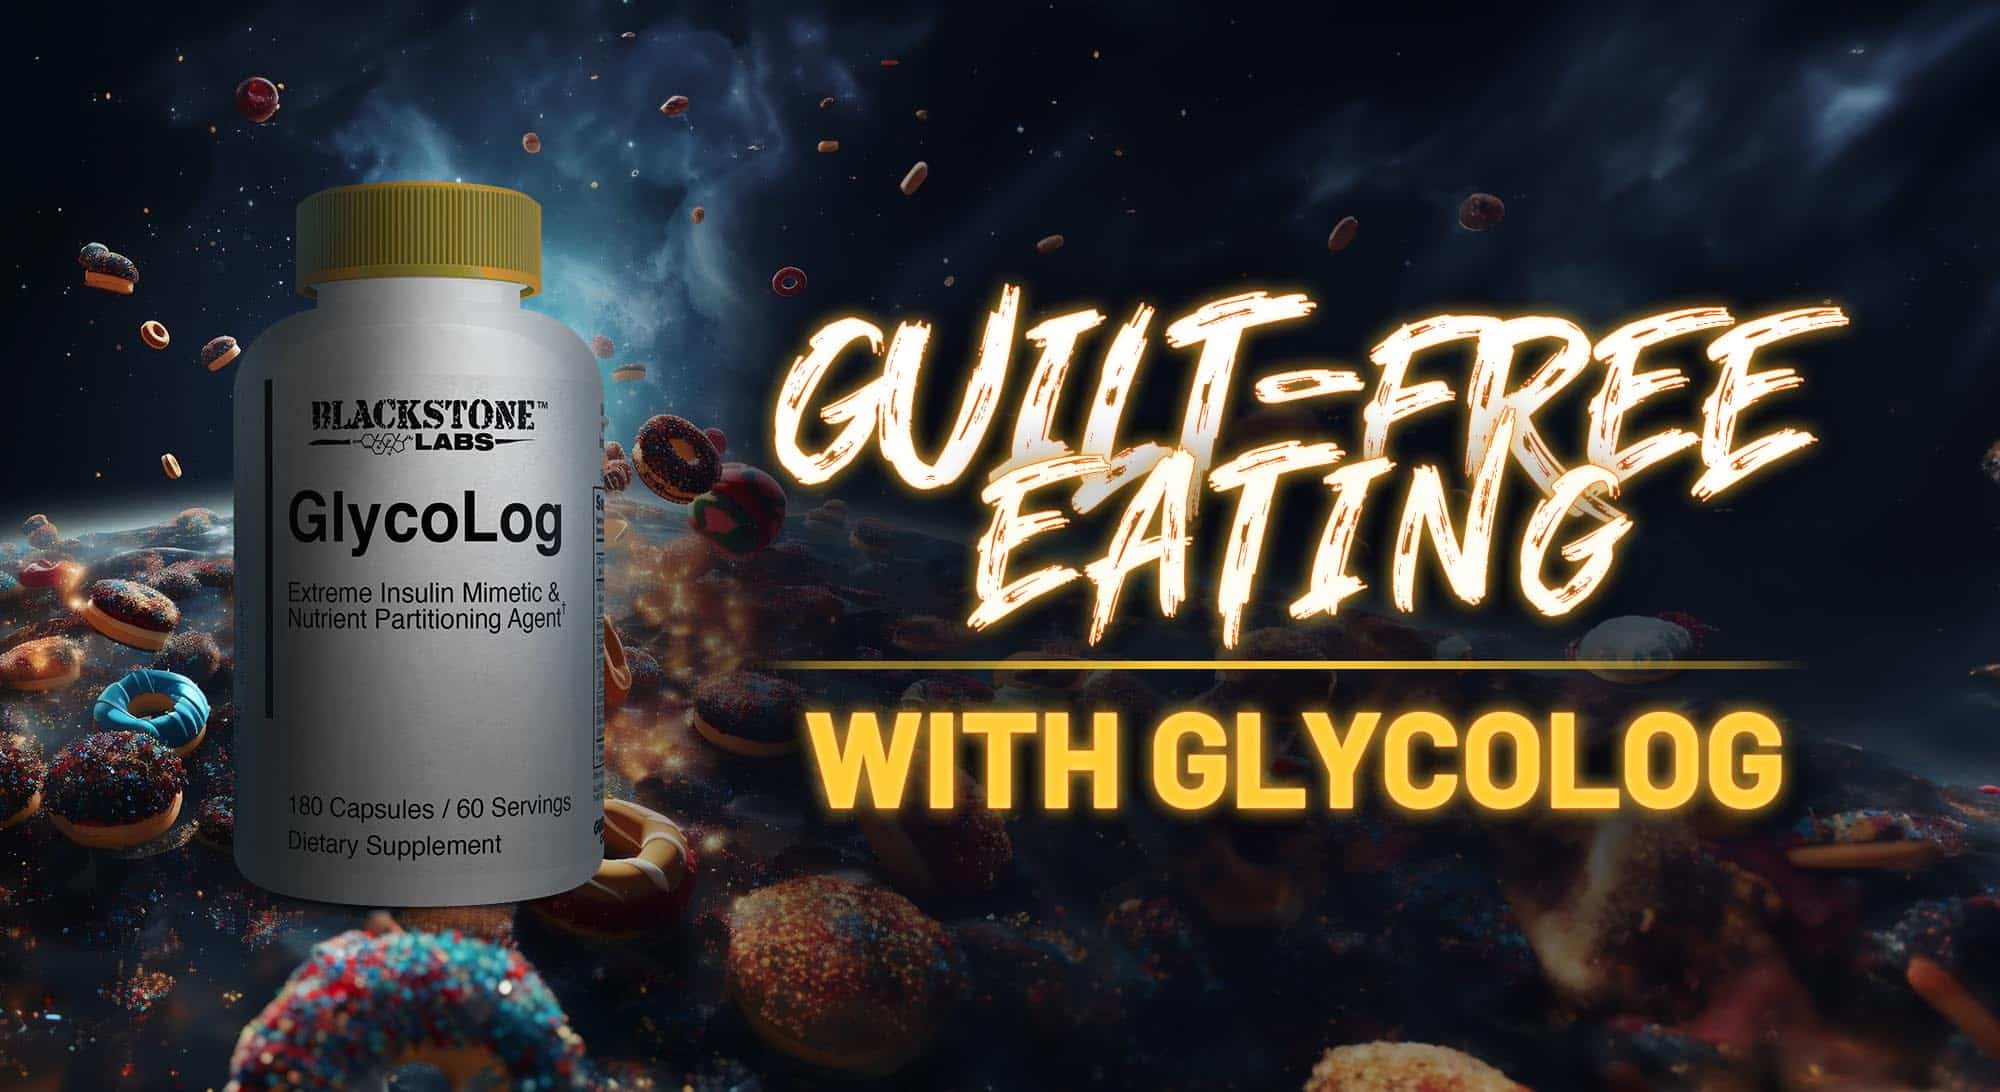 Guilt-free eating with Glycolog